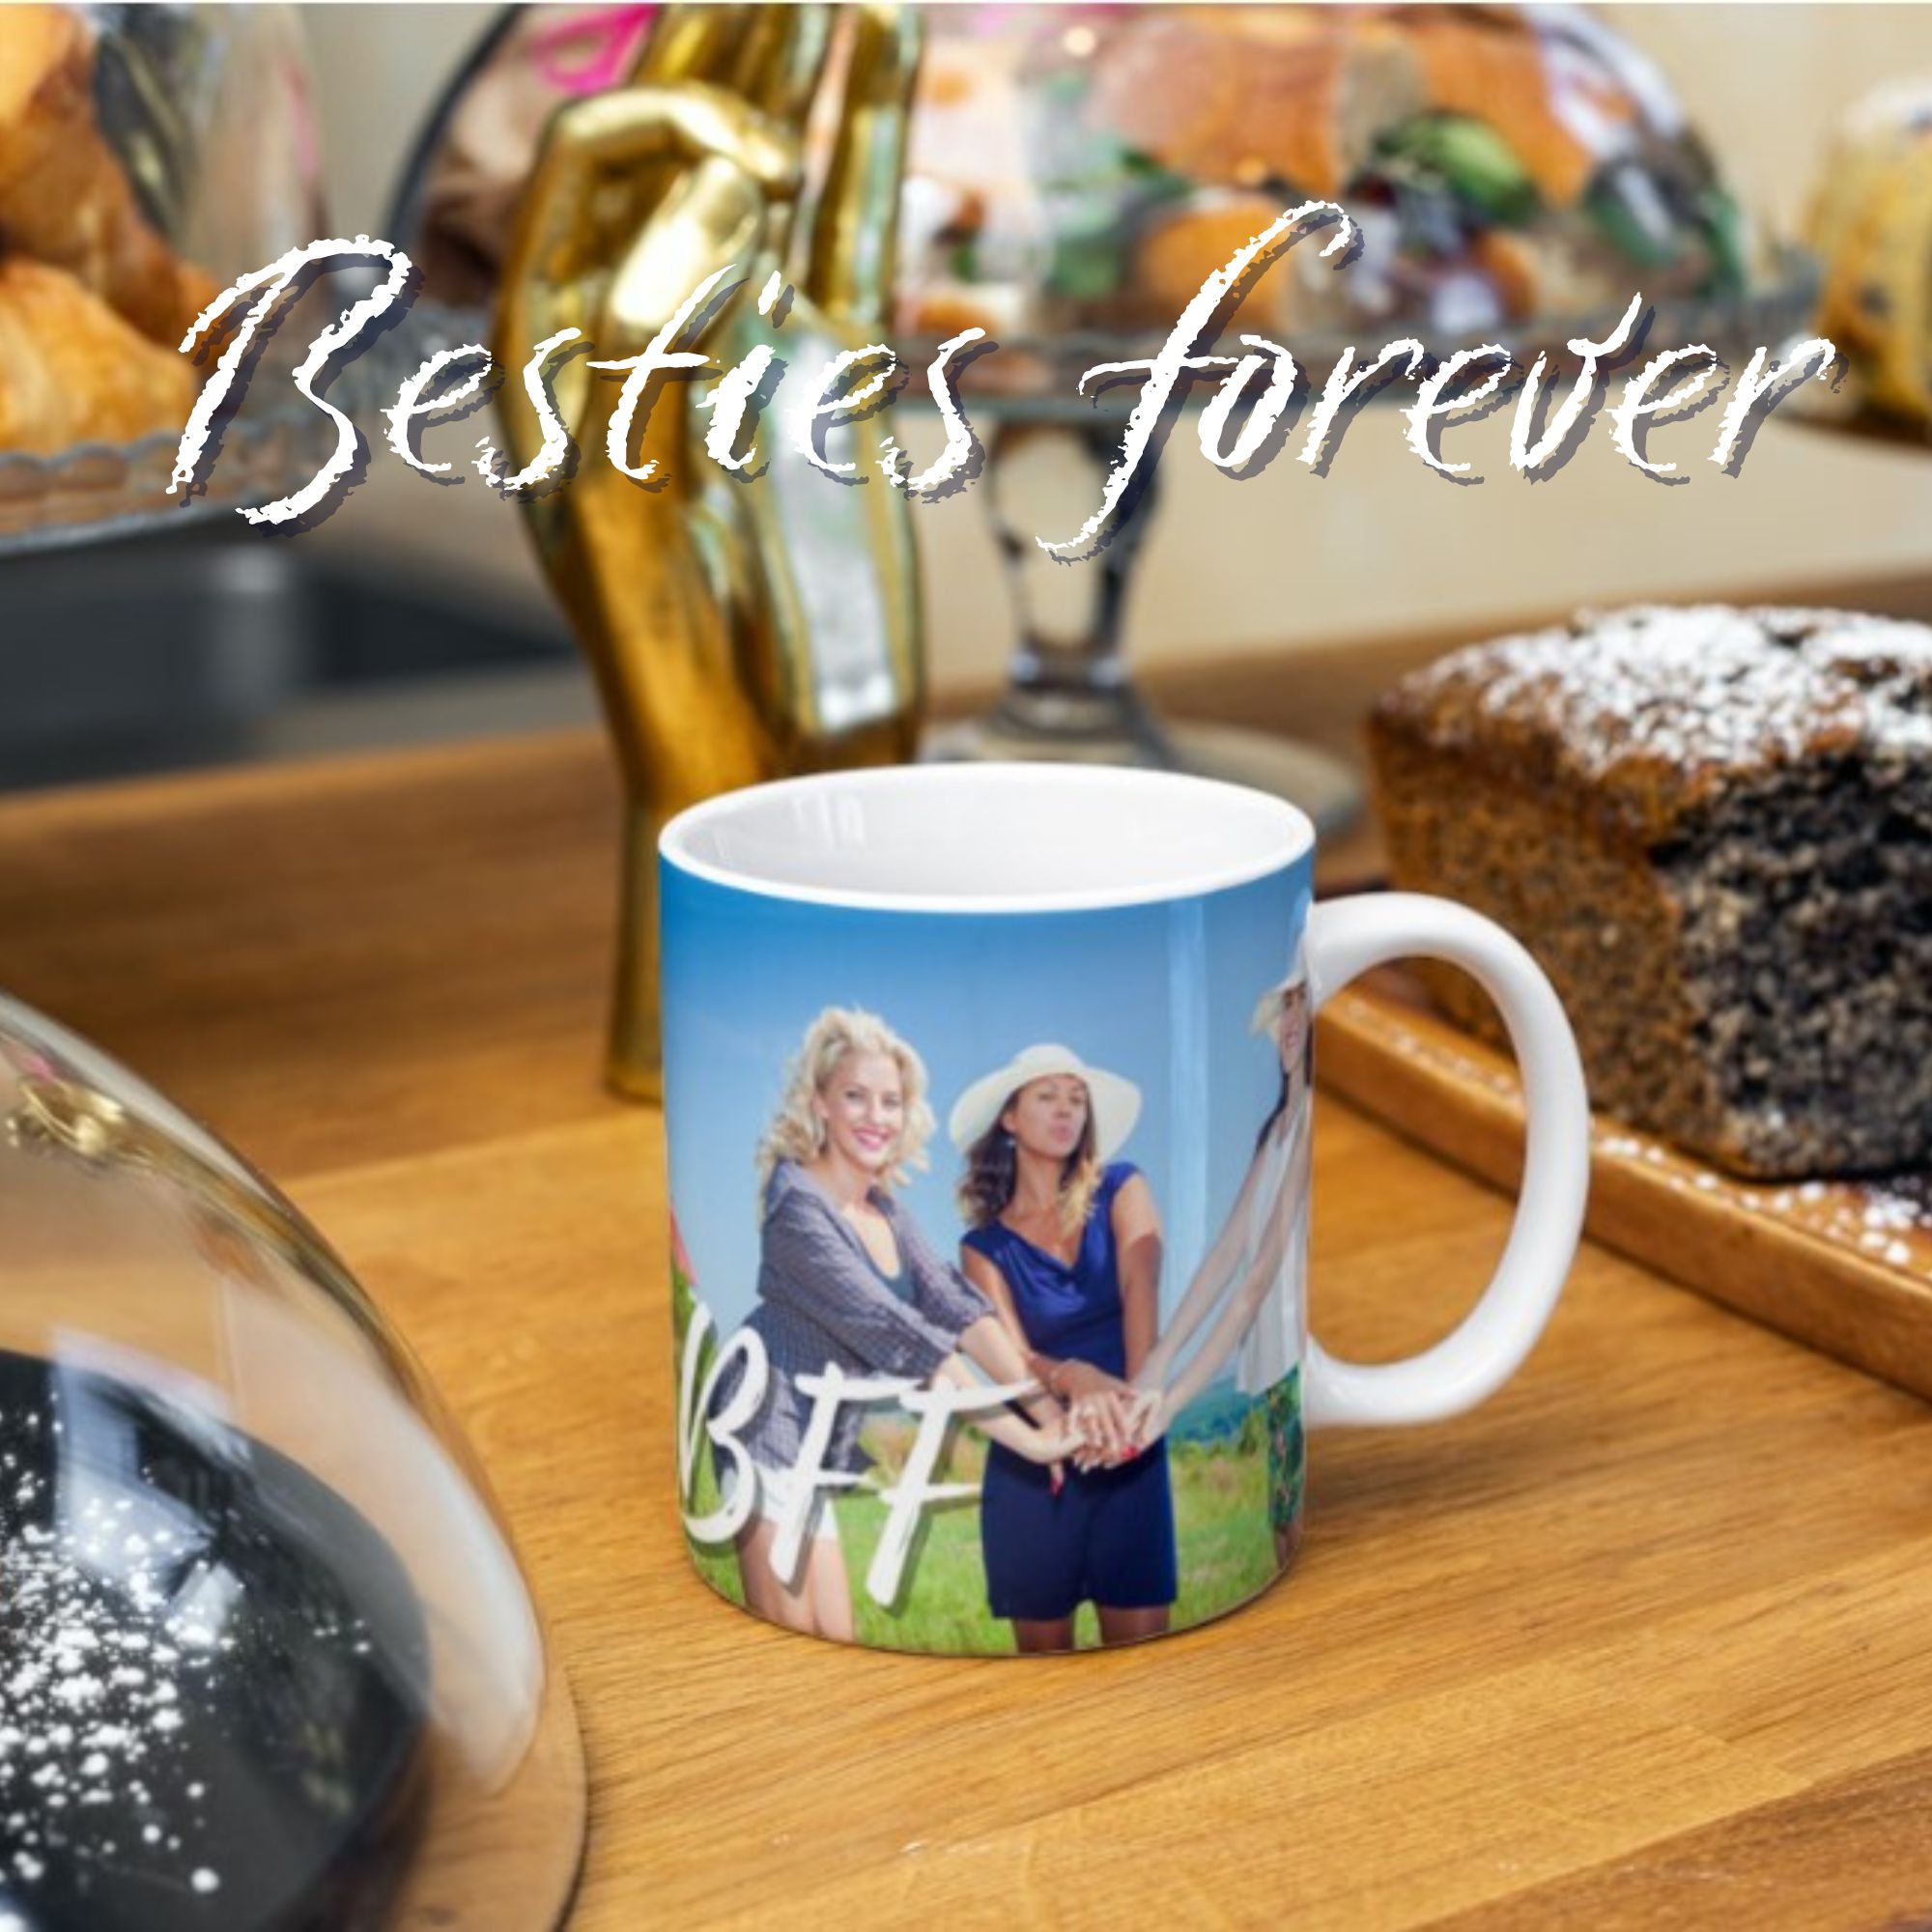 Mug filled with picture  besties forever